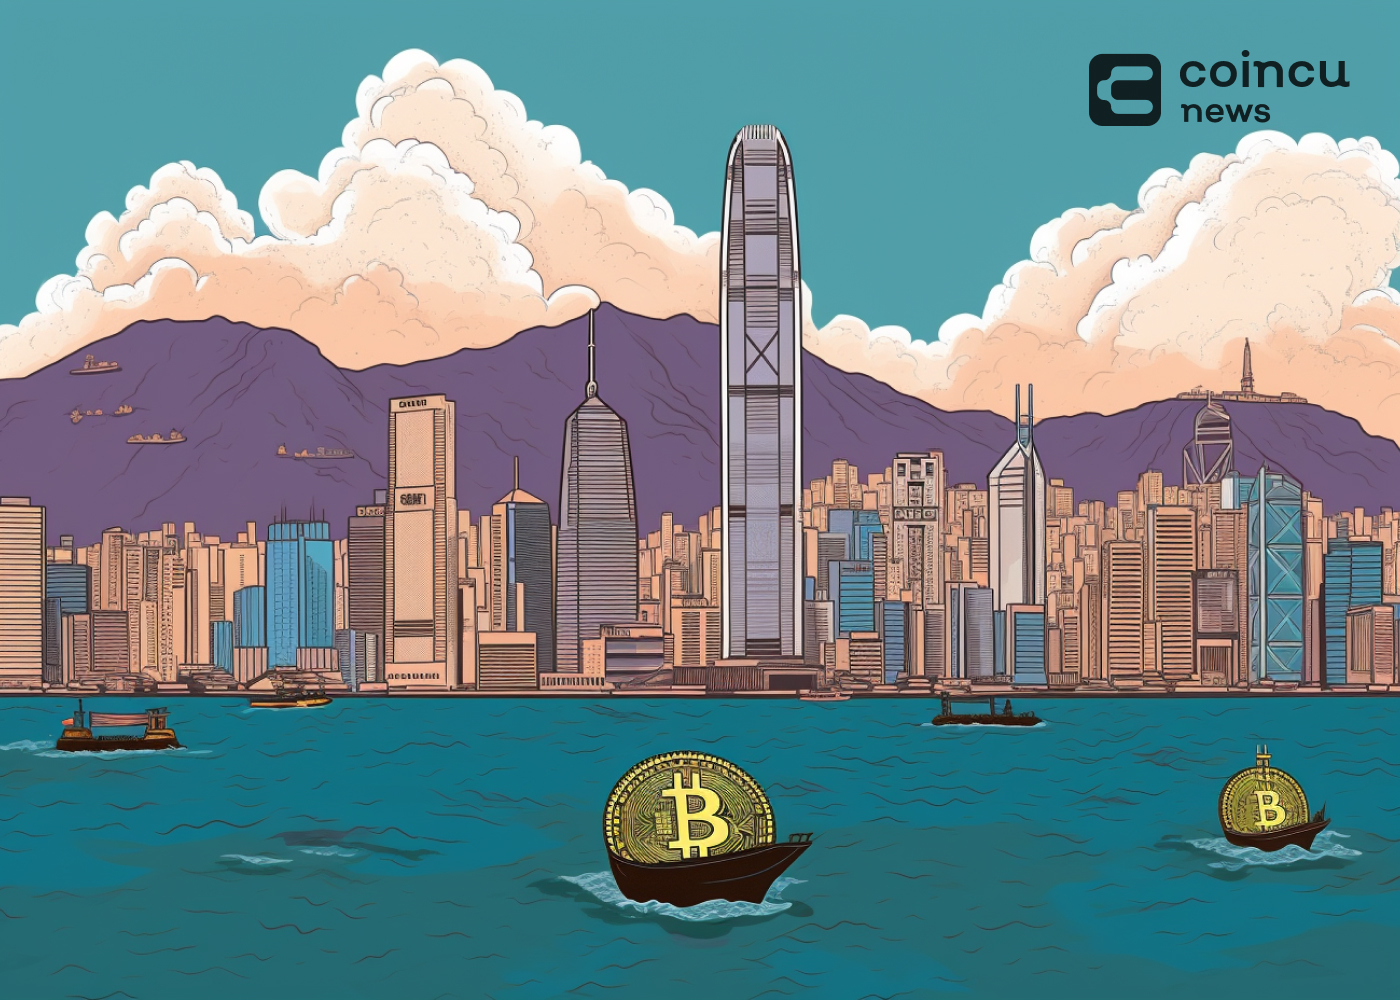 HKMA Cracks Down On Crypto 'Banks' With Warning Against Misleading Claims